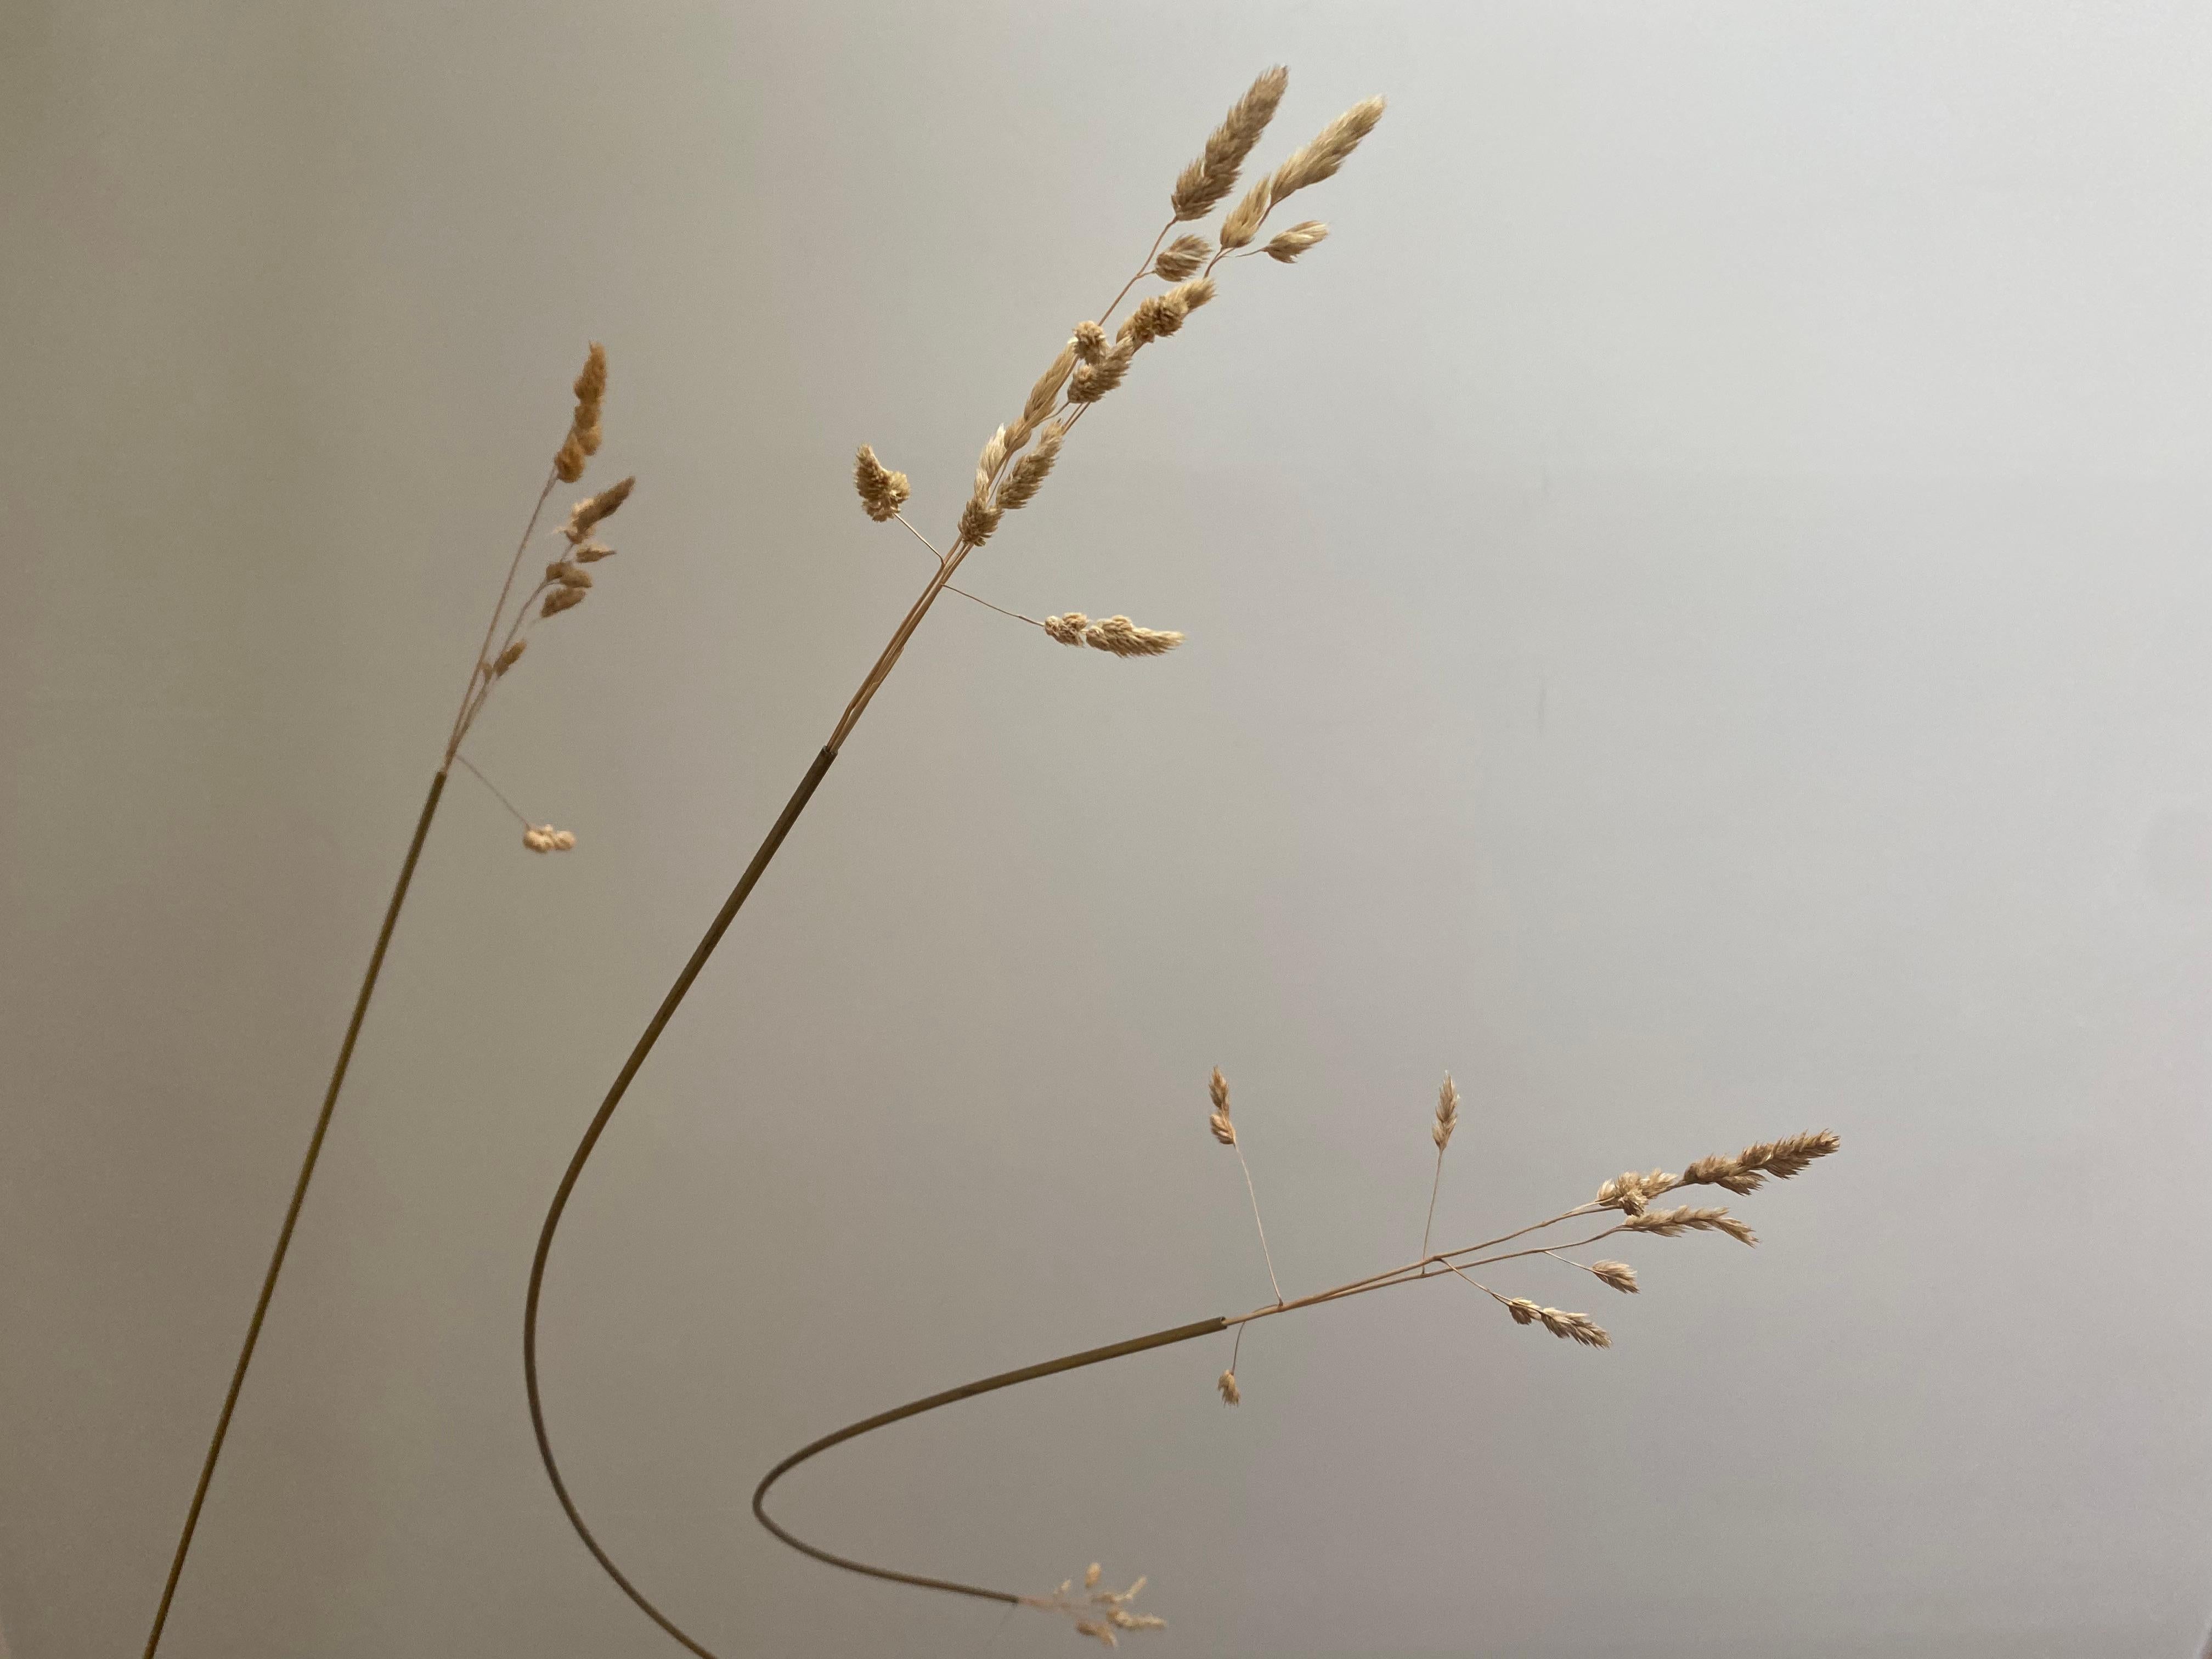 Dactyle Suspended Sculpture by STUDIO SOL LECCIA 
Materials: Brass, dactyle, nylon thread.
Dimensions: L 120 x H 80 cm.

This hanging sculpture was inspired by a grass, dactylis glomerata. 

In 2020, our limited horizon gave a completely different